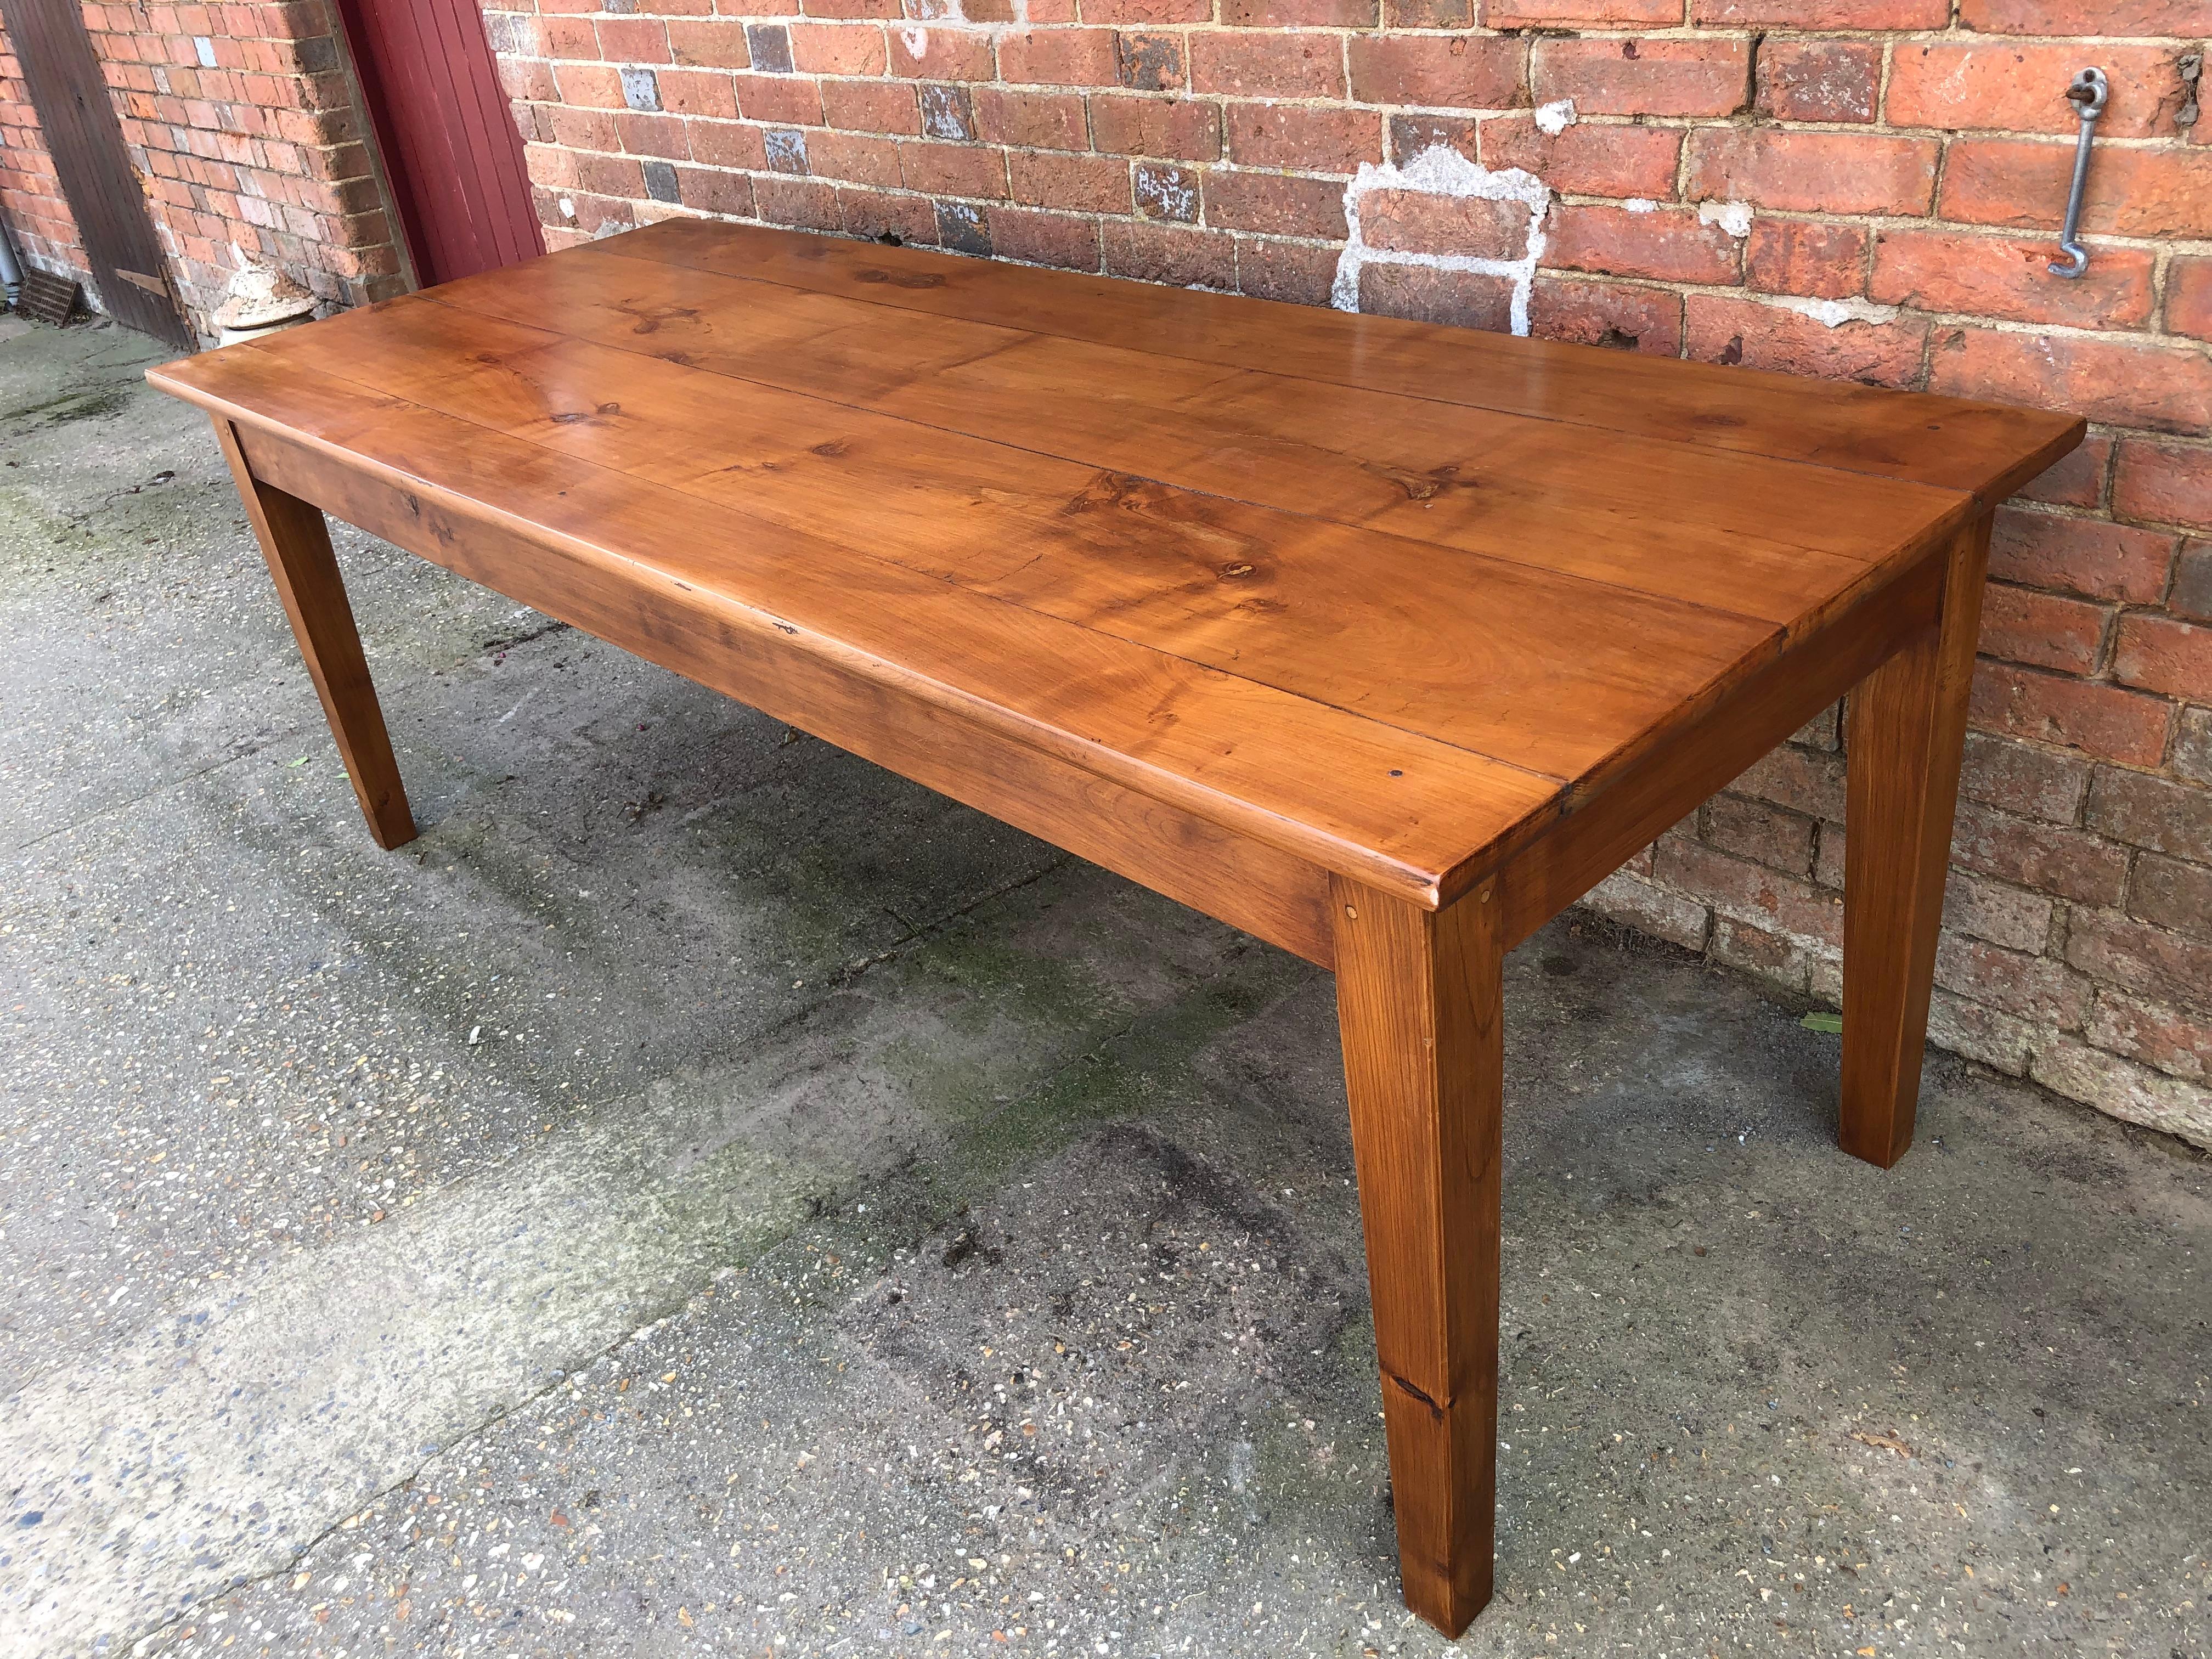 Well proportioned solid cherrywood French farmhouse table on square tapering legs, of good color and figuring.